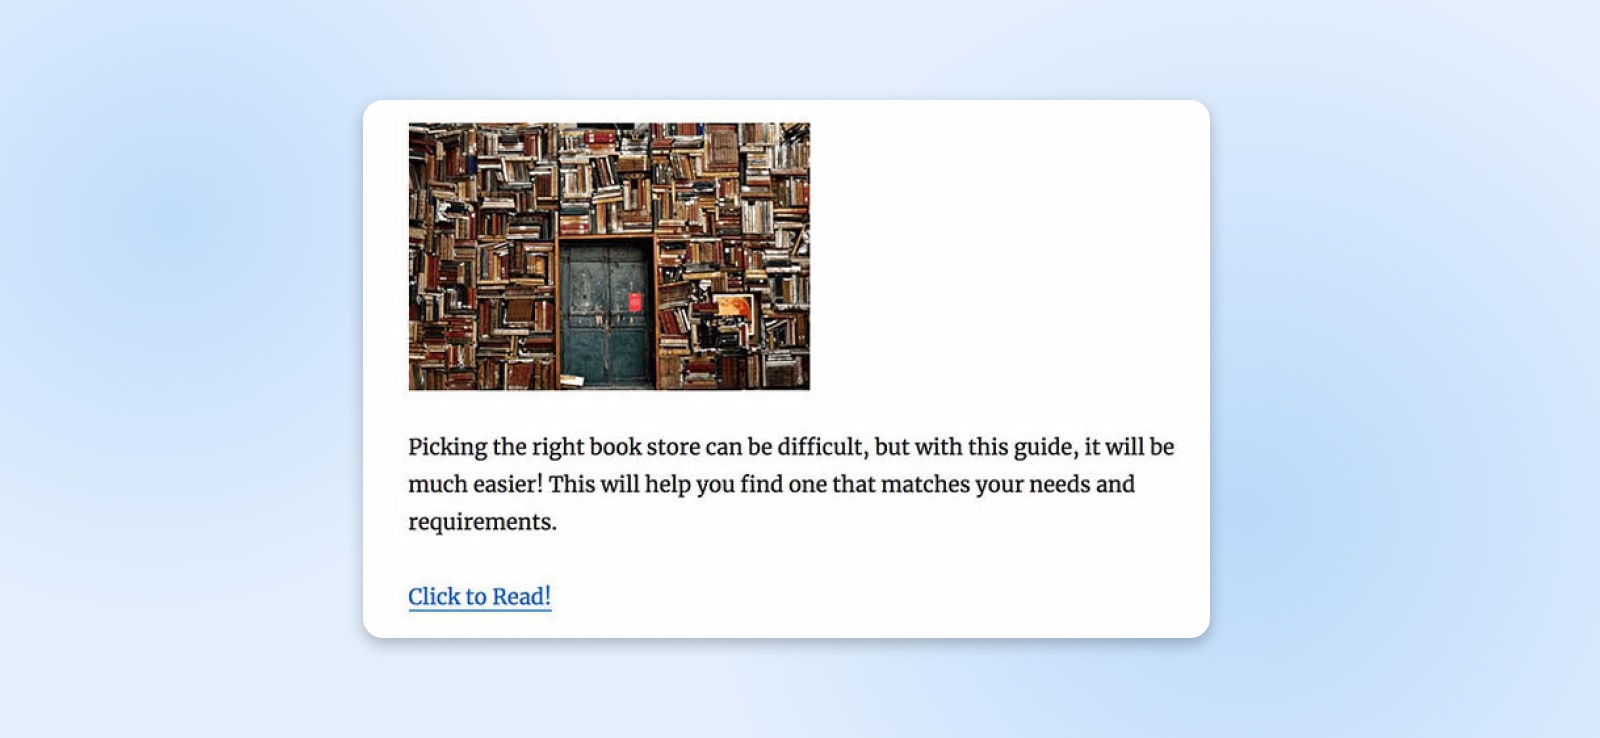 example of this plugin at work with a header image, some text, and a "Click to Read!" call to action 